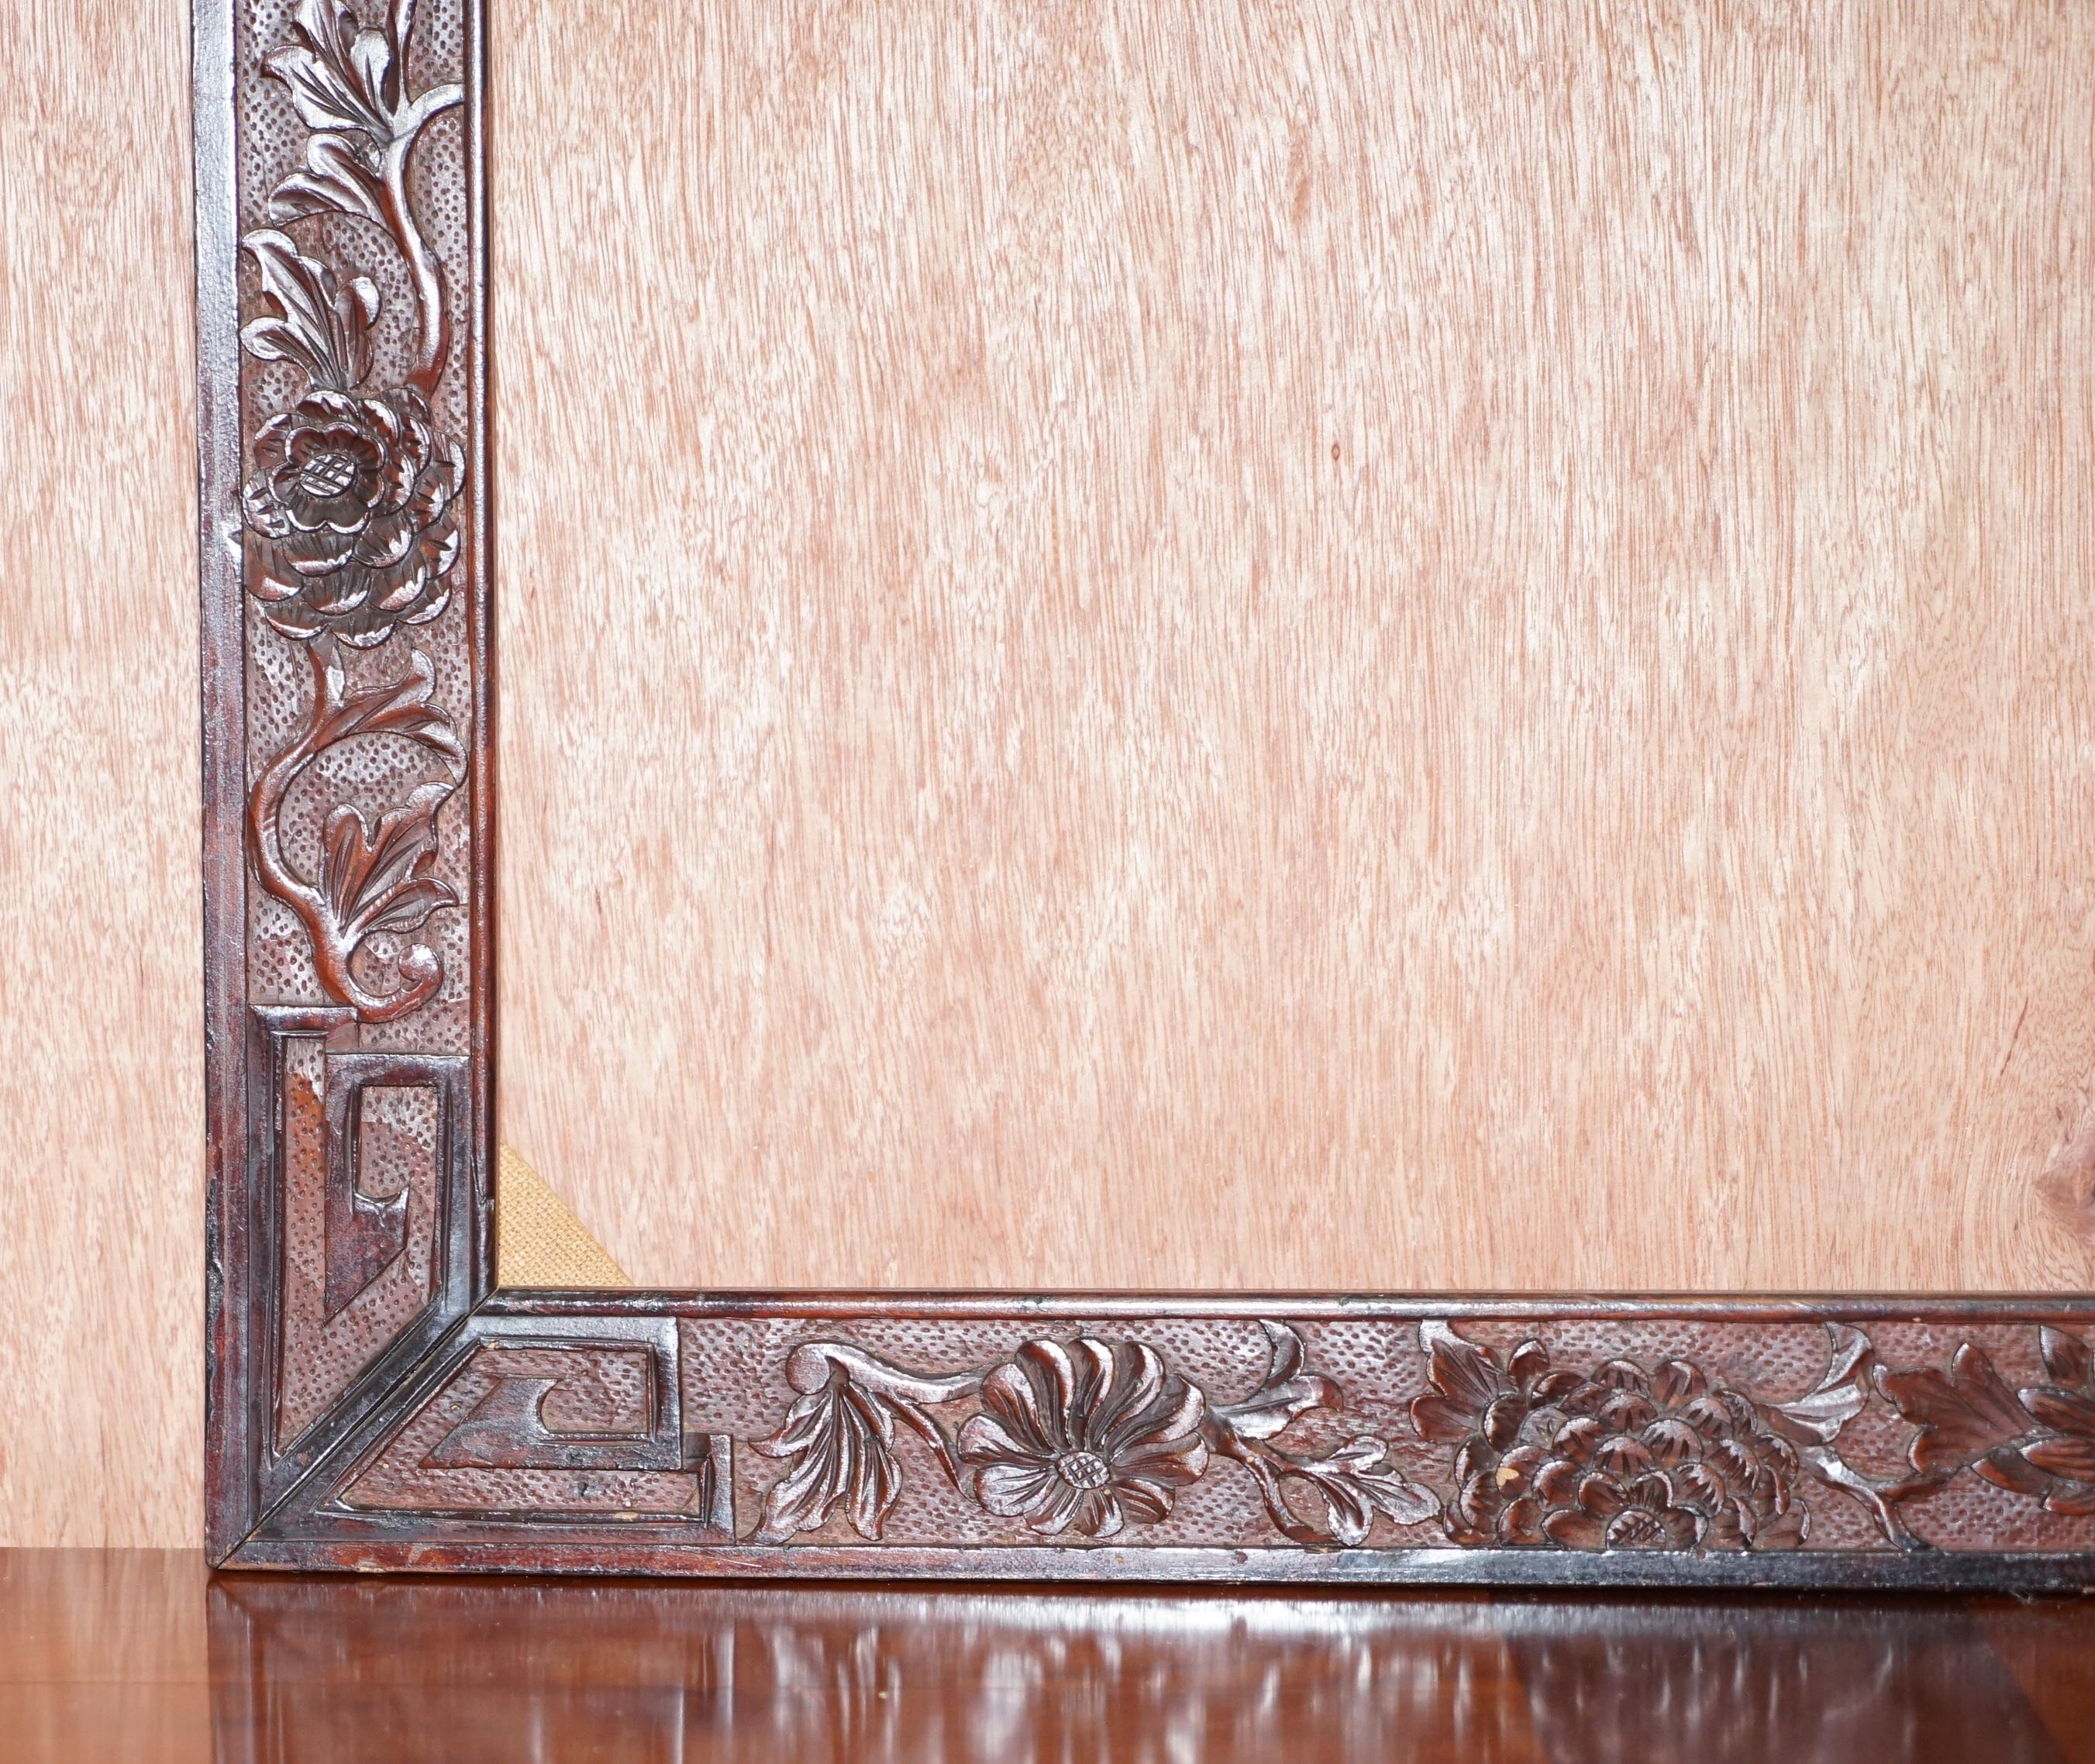 Early 20th Century Pair of Chinese Export circa 1920 Hardwood Mirror or Picture Frames Floral Decor